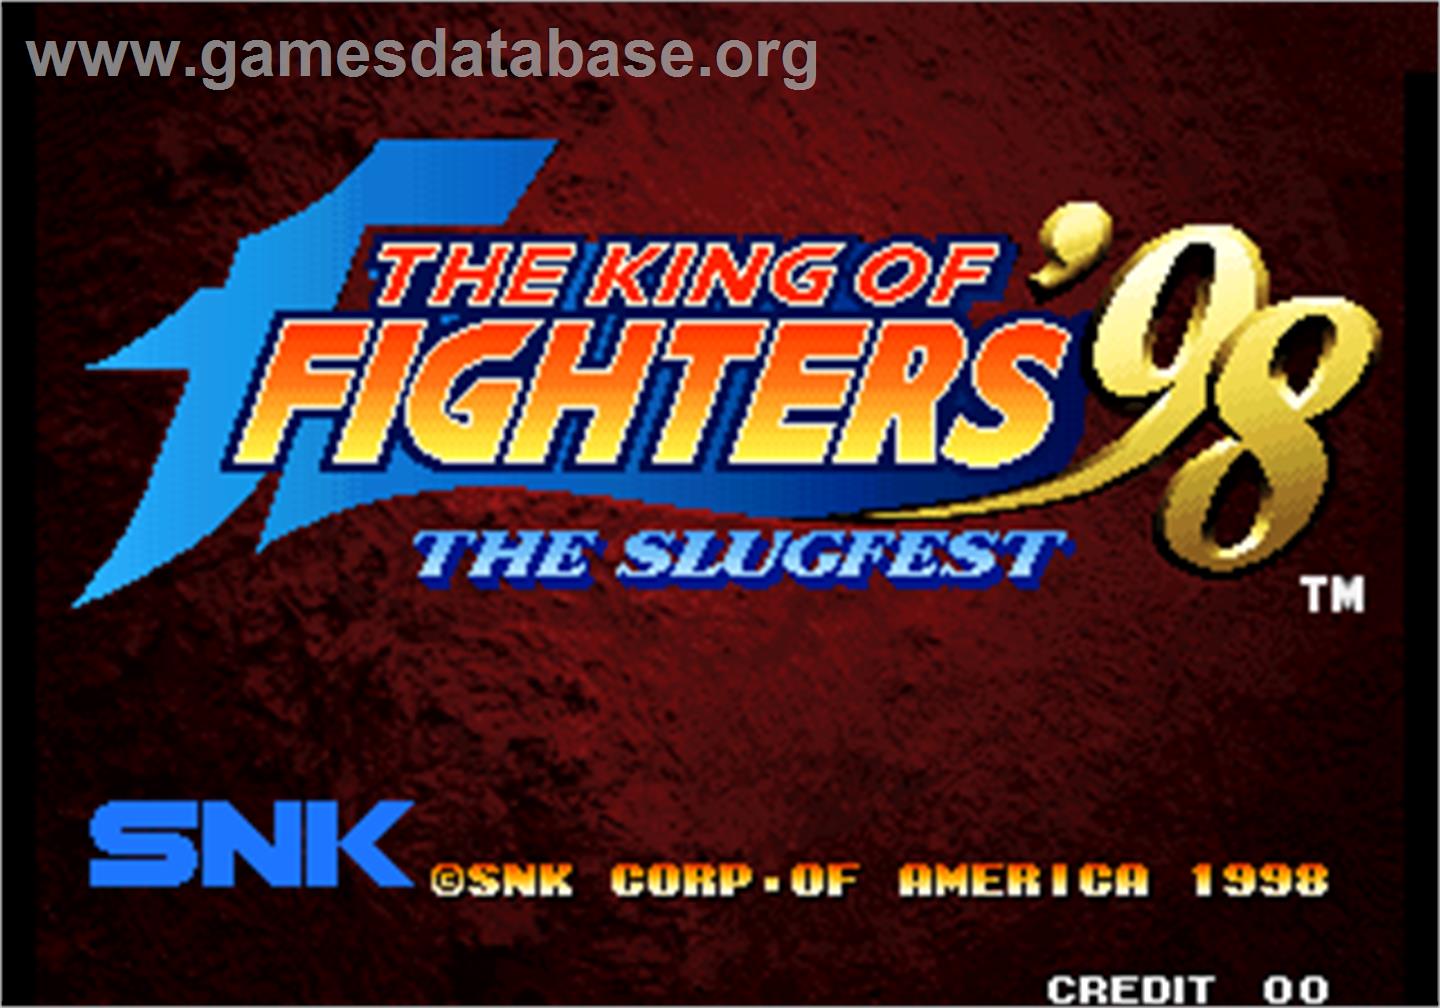 The King of Fighters '98 - The Slugfest / King of Fighters '98 - dream match never ends - Arcade - Artwork - Title Screen